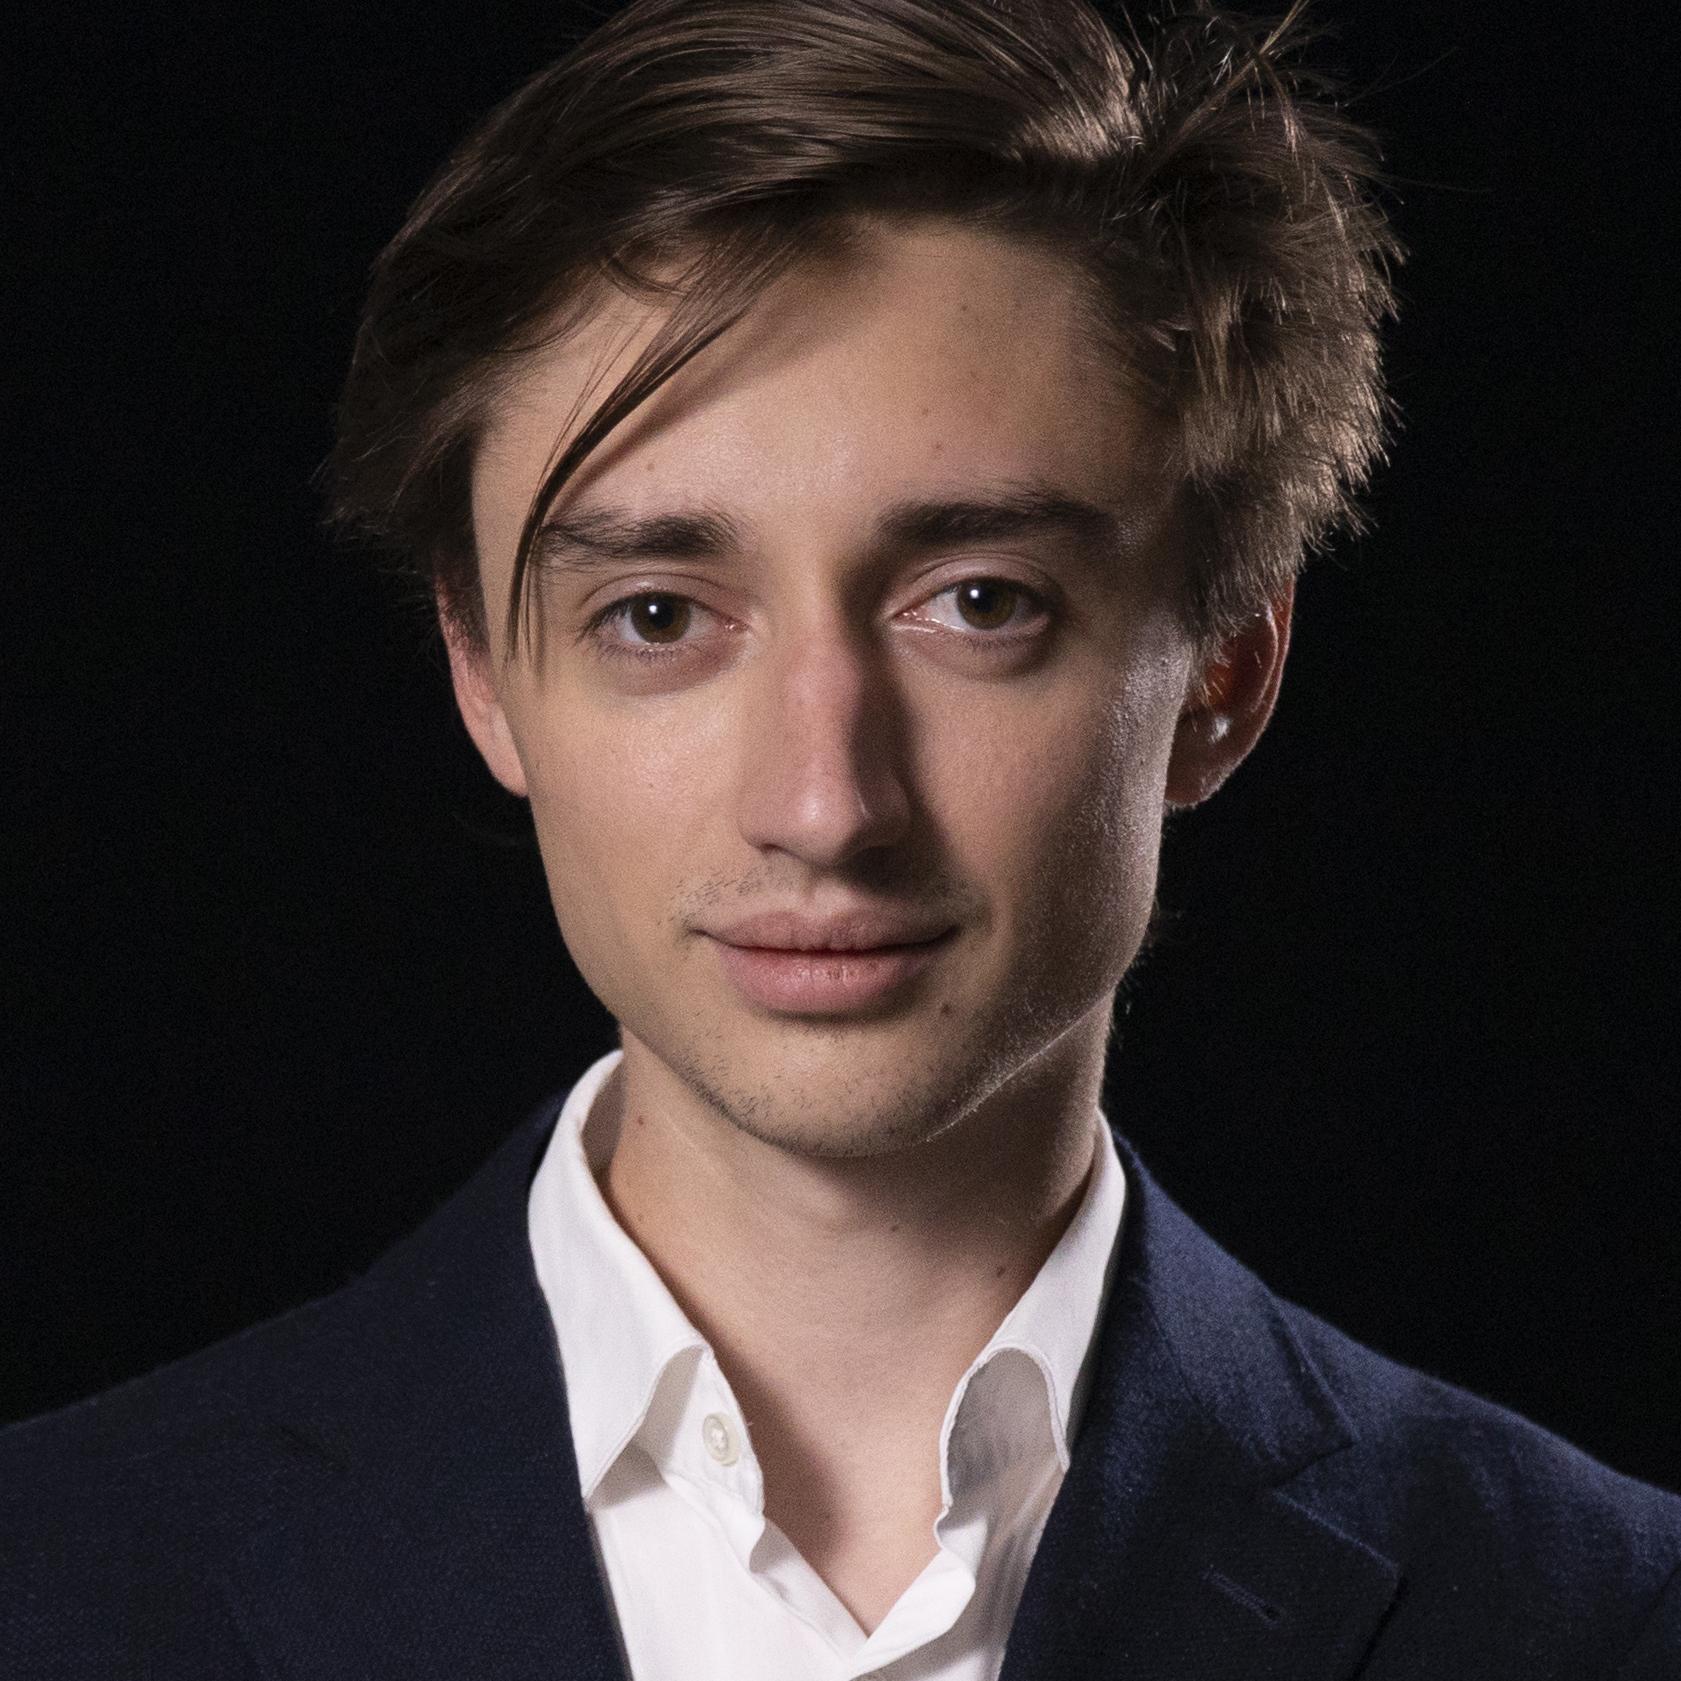 Chess.com on X: ♖ Winning game of the year in 2020 in an absolute  landslide is the masterpiece of Daniil Dubov vs. Sergey Karjakin from the  Russian Superfinal!  / X